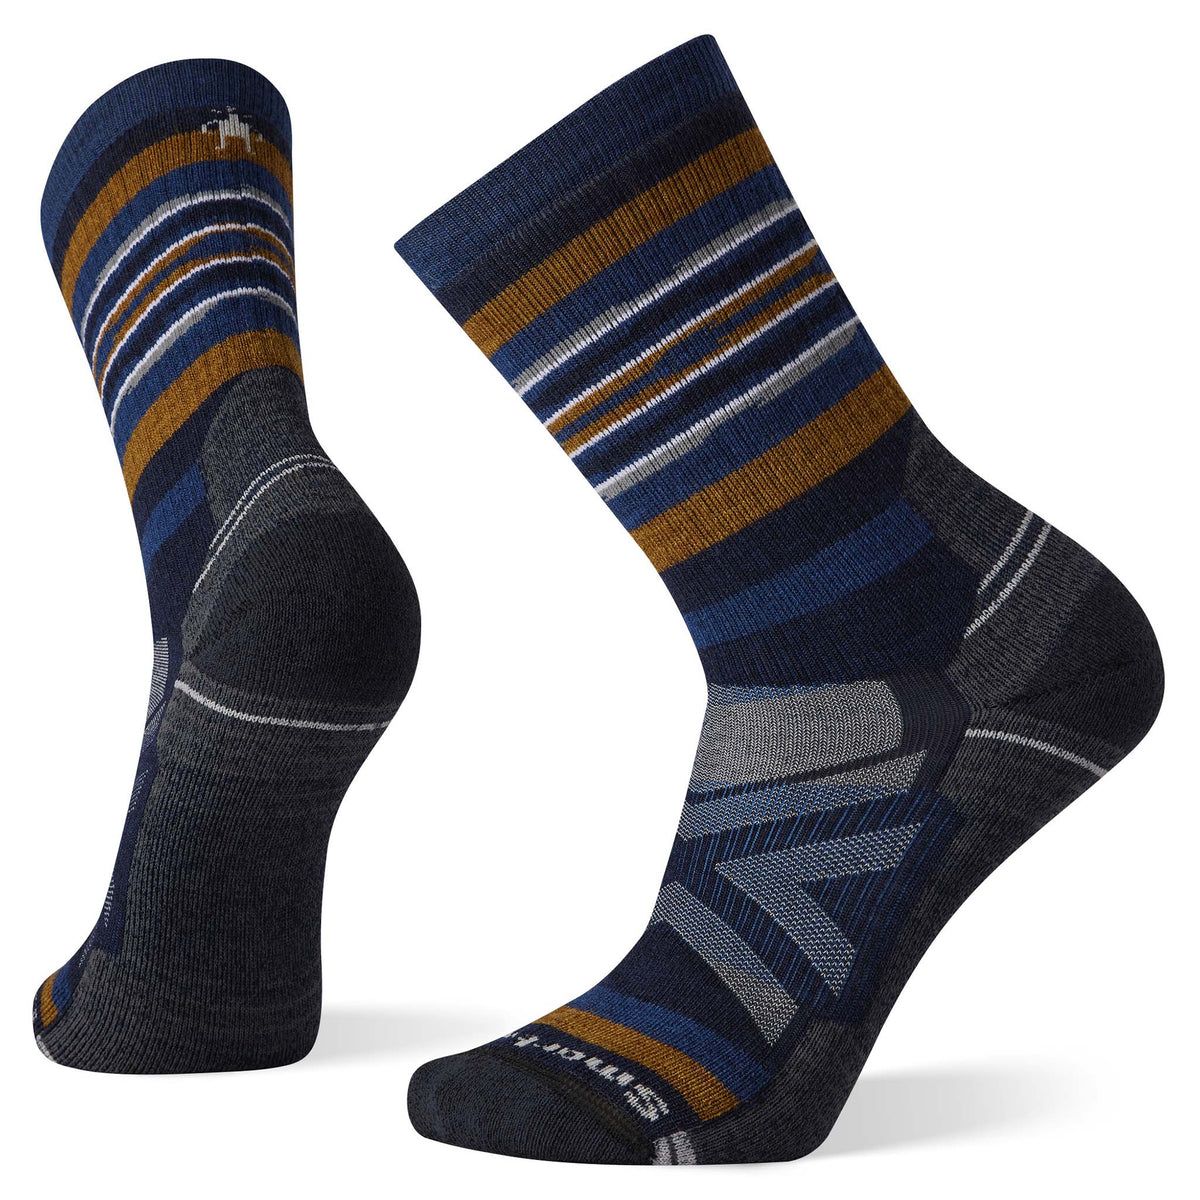 Smartwool Performance Hike Full Cushion chaussettes deep navy pour homme